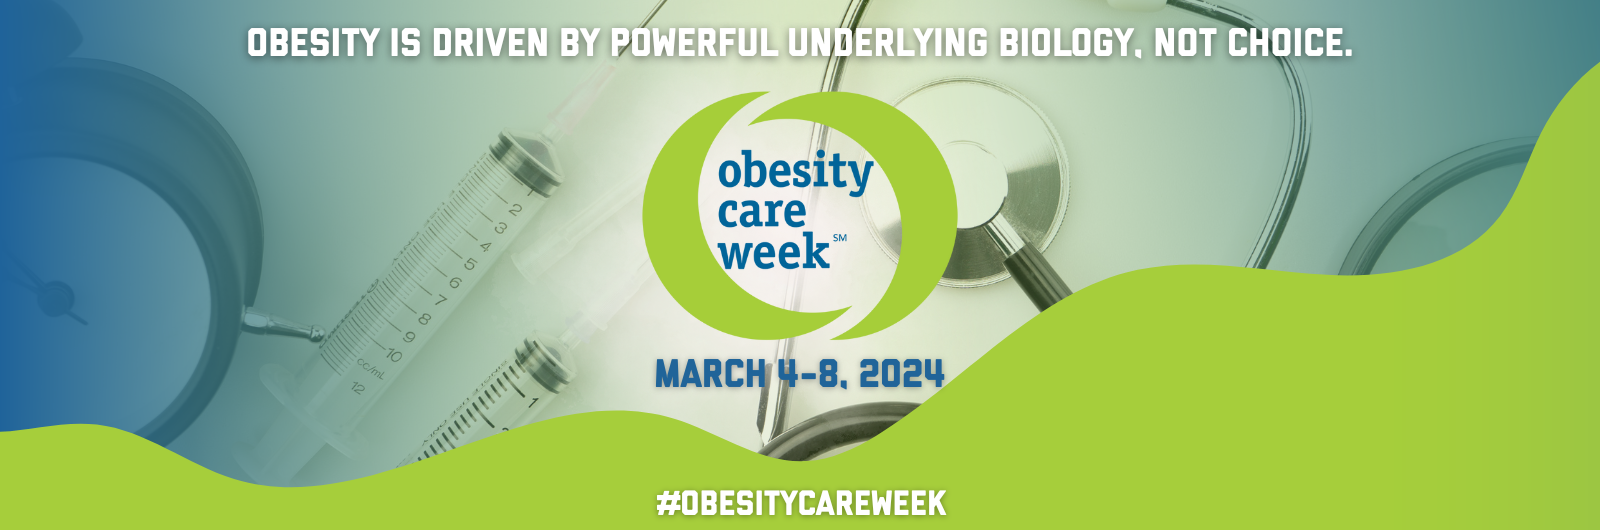 Obesity Care Week Logo with date and hashtag